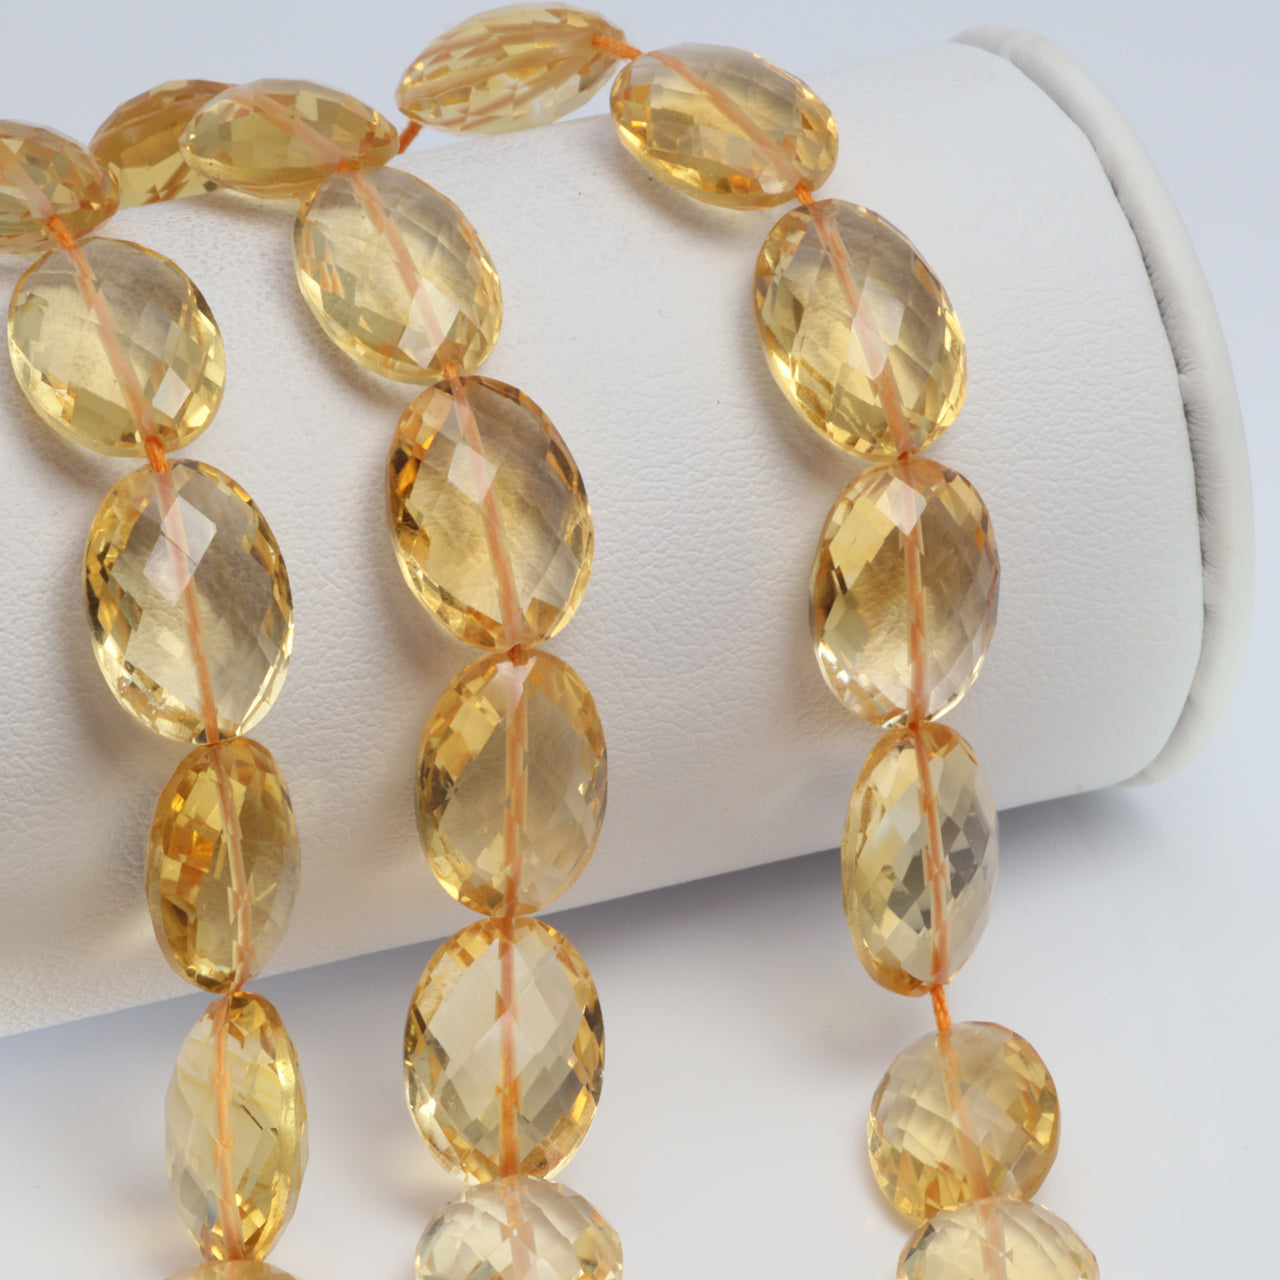 Yellow Citrine 14x10mm Faceted Ovals